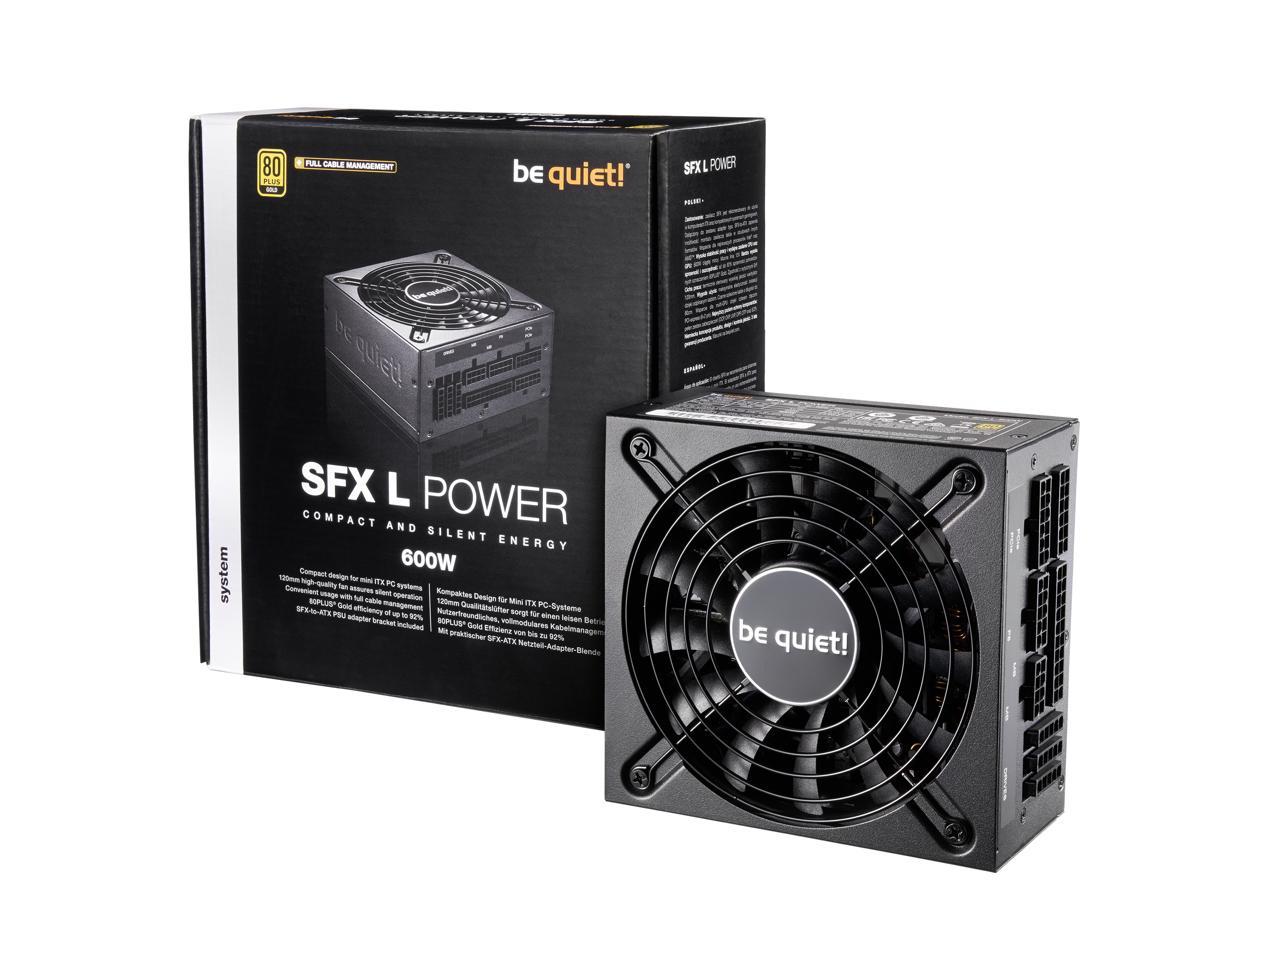 Be Quiet! Bn639 Sfx L Power 600W, 80 Plus Gold Efficiency, Full Cable Management And Quiet Operation Thanks To 120Mm High-Quality Fan.